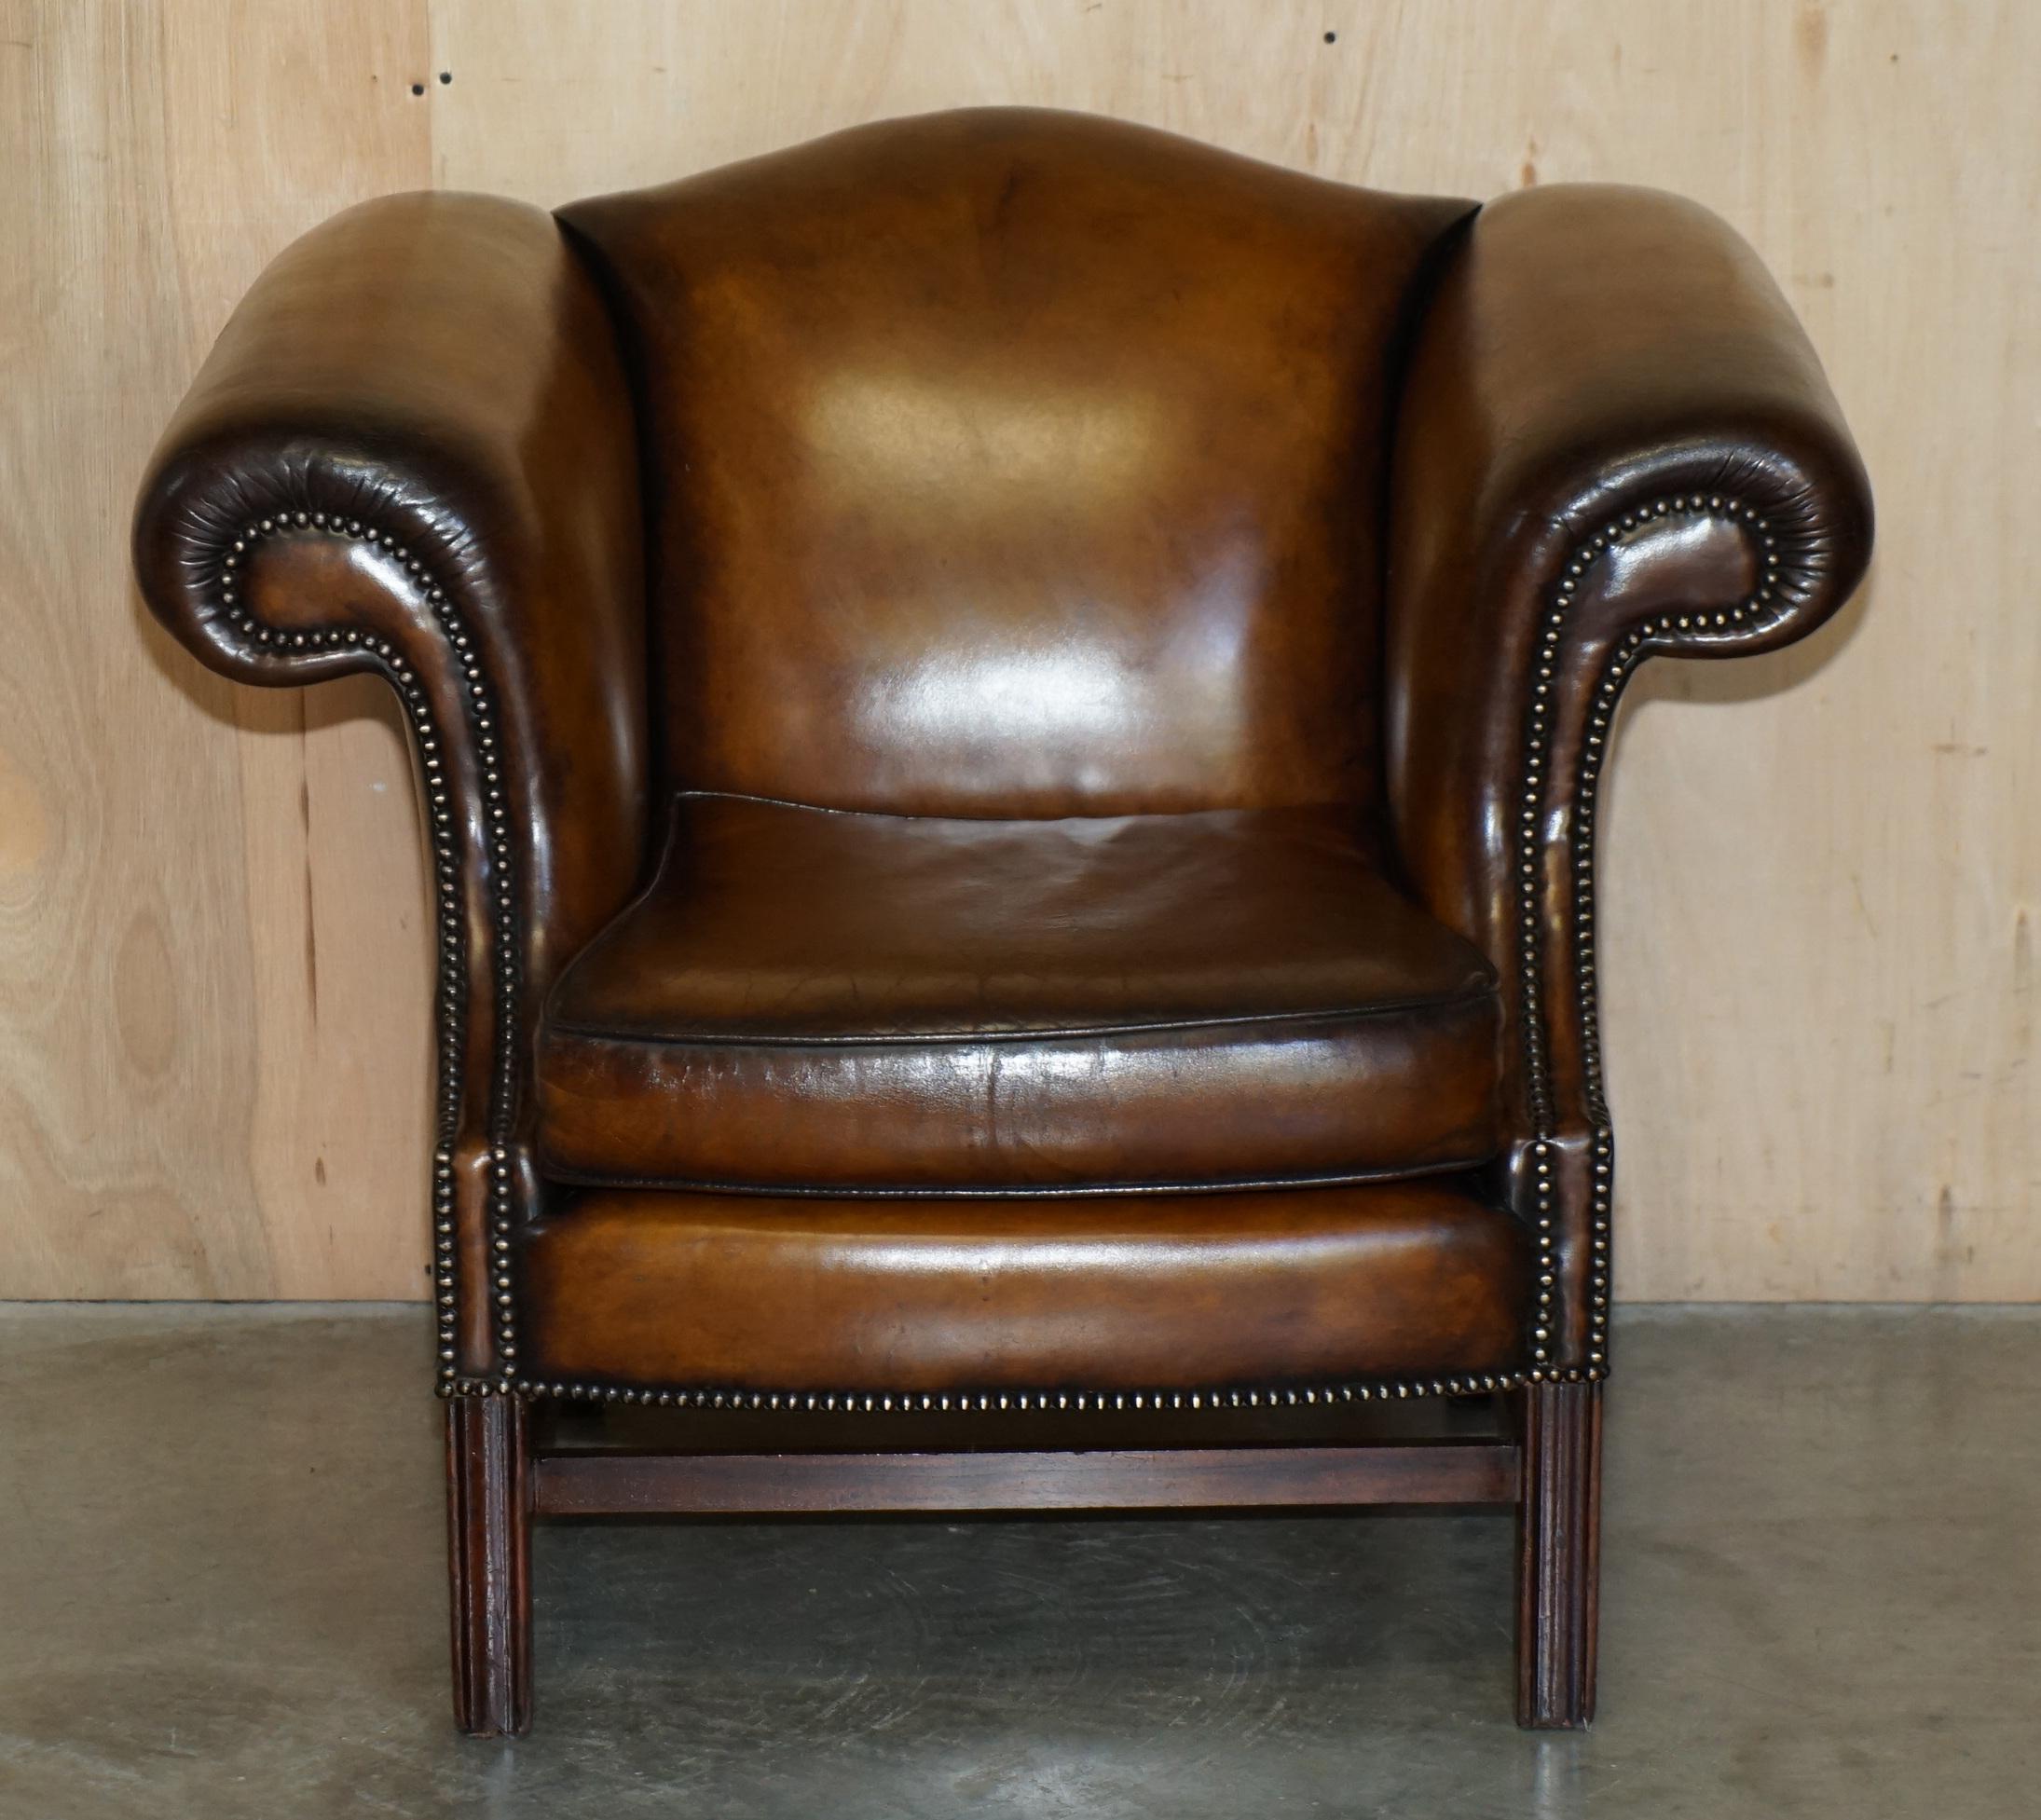 FINE ANTiQUE REGENCY HUMPBACK STYLE RESTORED BROWN LEATHER SOFA ARMCHAIR SUITE For Sale 6